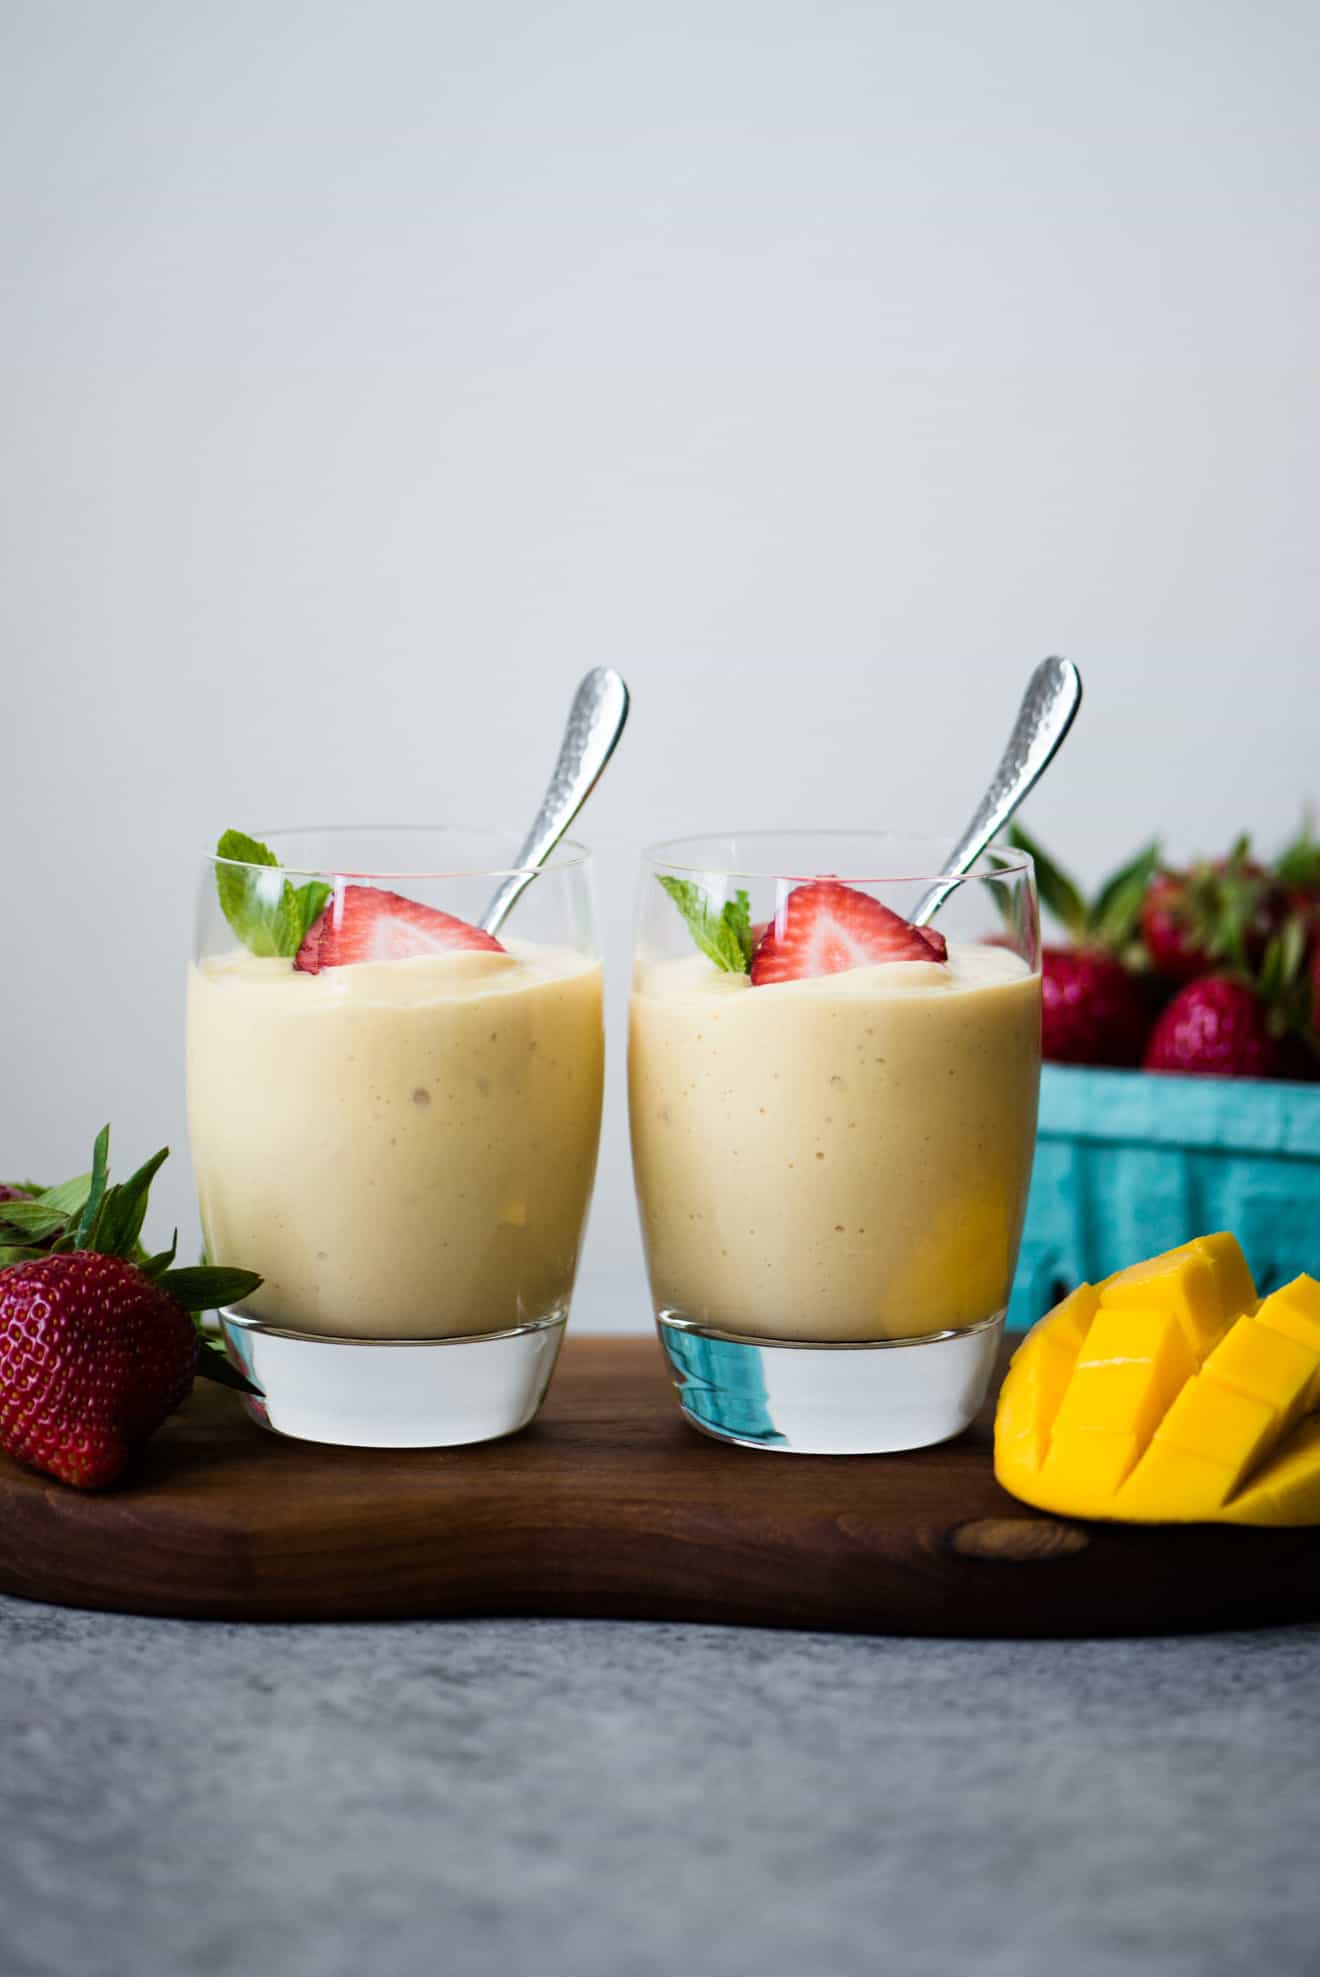 Vegan Mango and Pineapple Mousse - easy dessert made with just 5 ingredients! dairy free + gluten free!